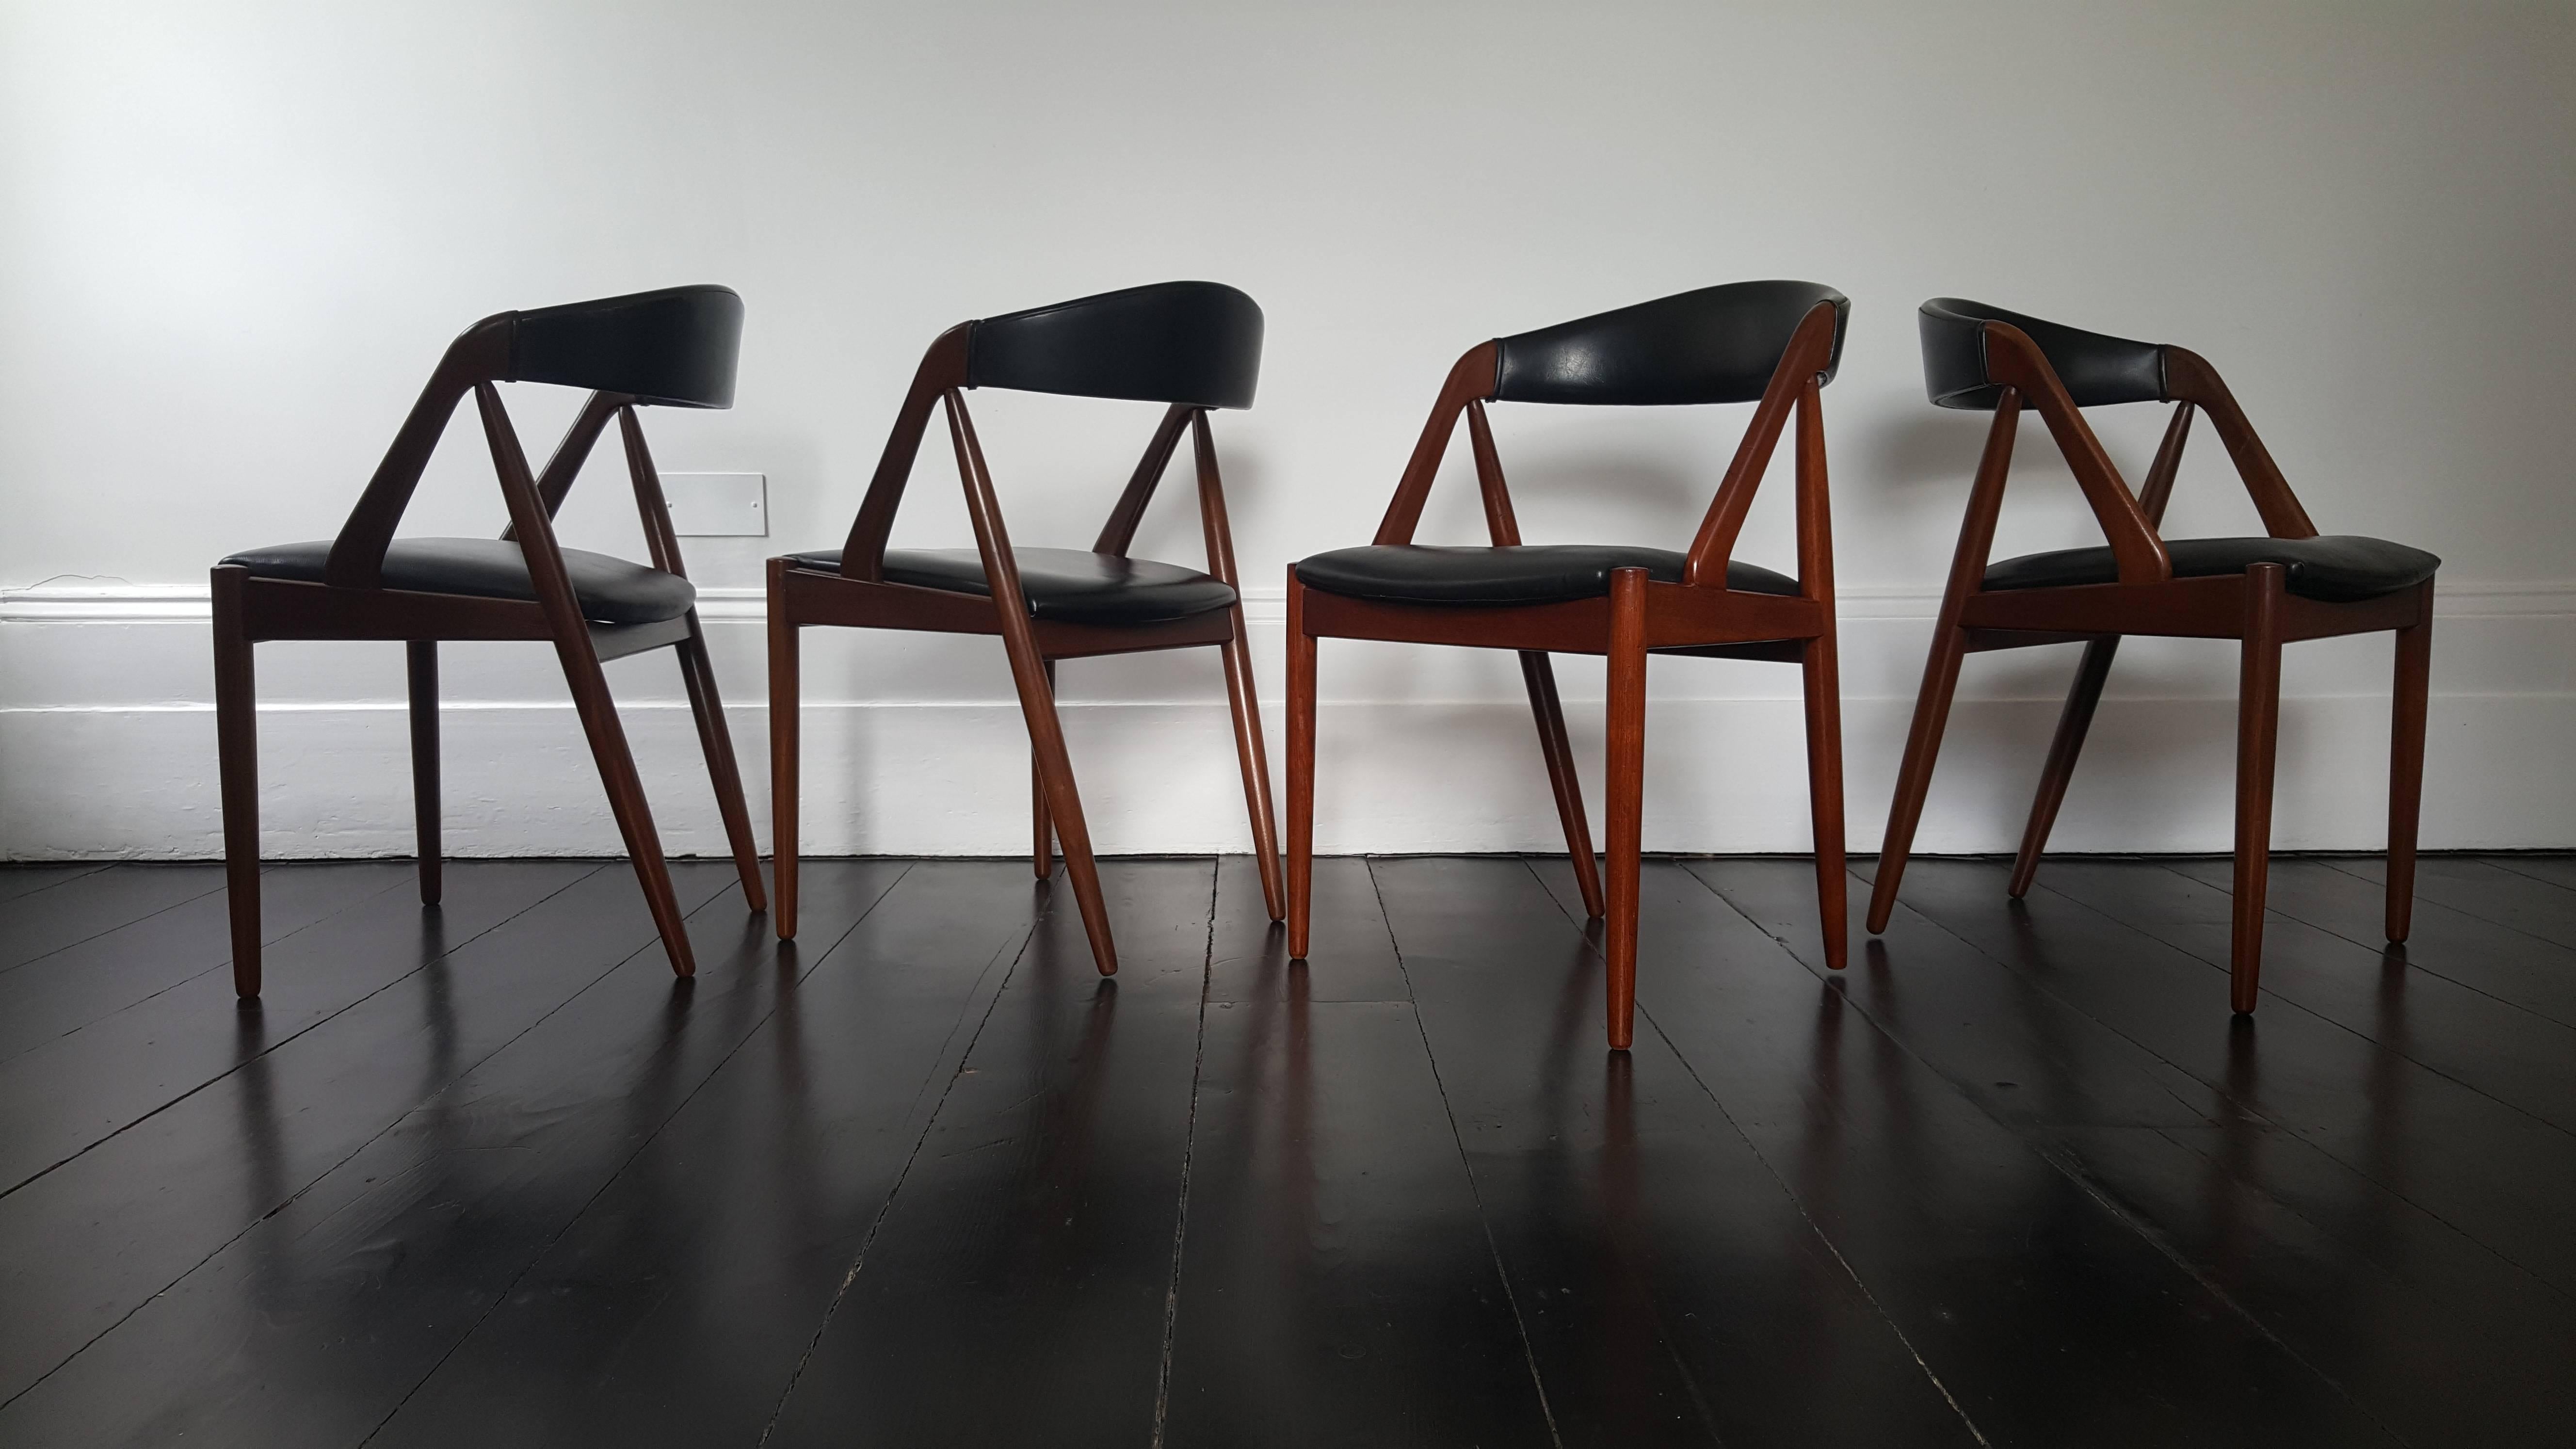 Amazing four Kai Kristiansen model 31 teak 'A' frame dining chairs for Schou Andersen 1960s, original faux black leather upholstery.

We provide very competitive global shipping rates per your requirements - please click the 'ask the seller' button